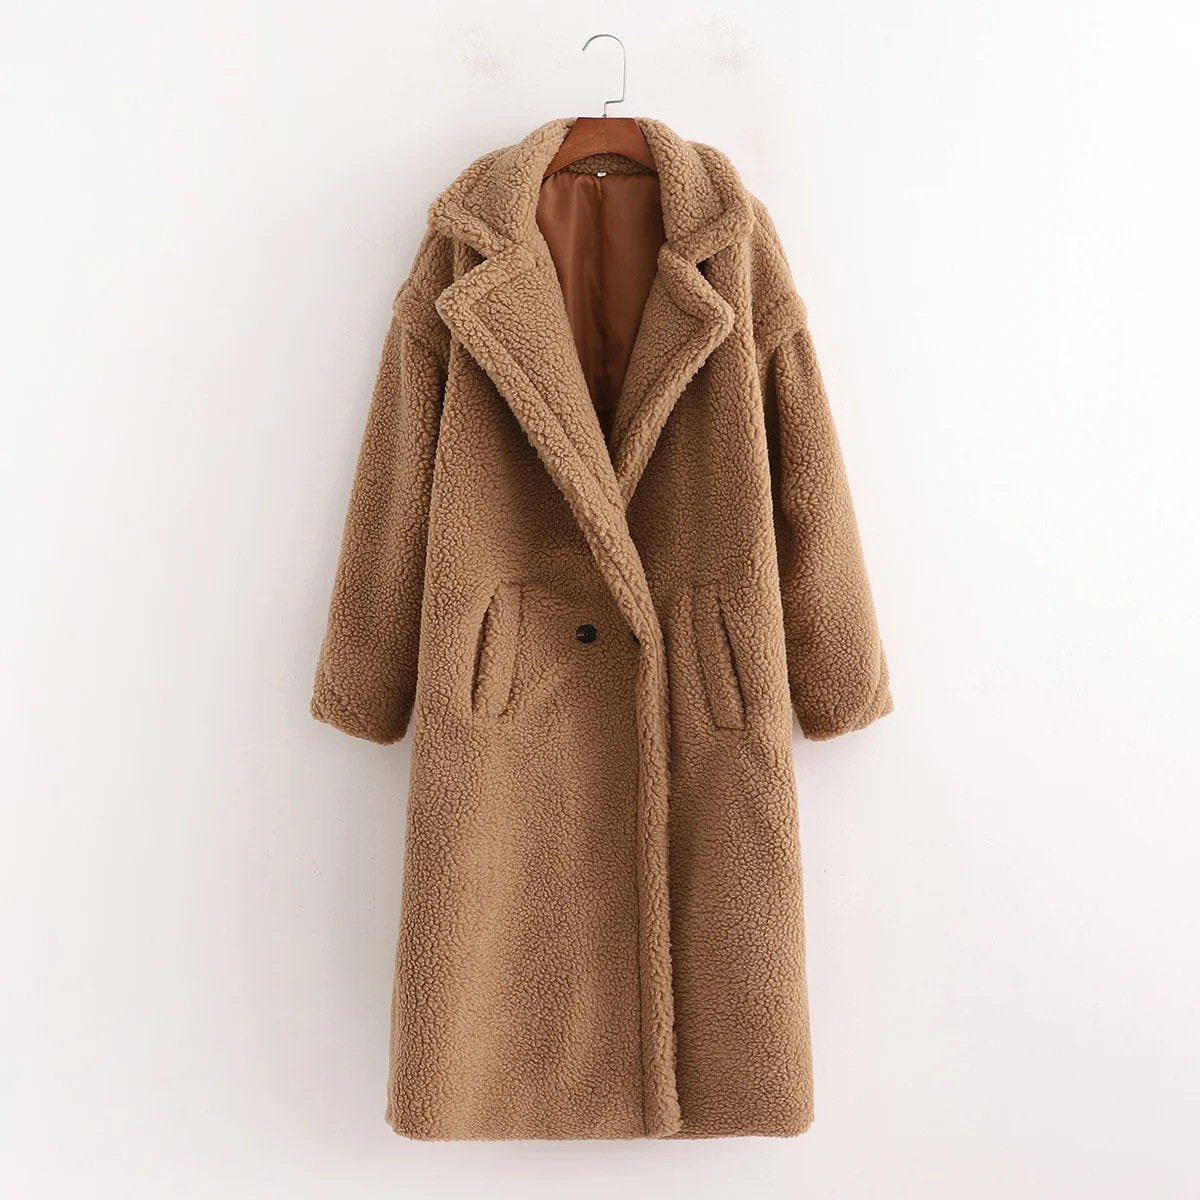 Winter Warm Fashion Long Overcoat for Women-Outerwear-Brown-S-Free Shipping at meselling99